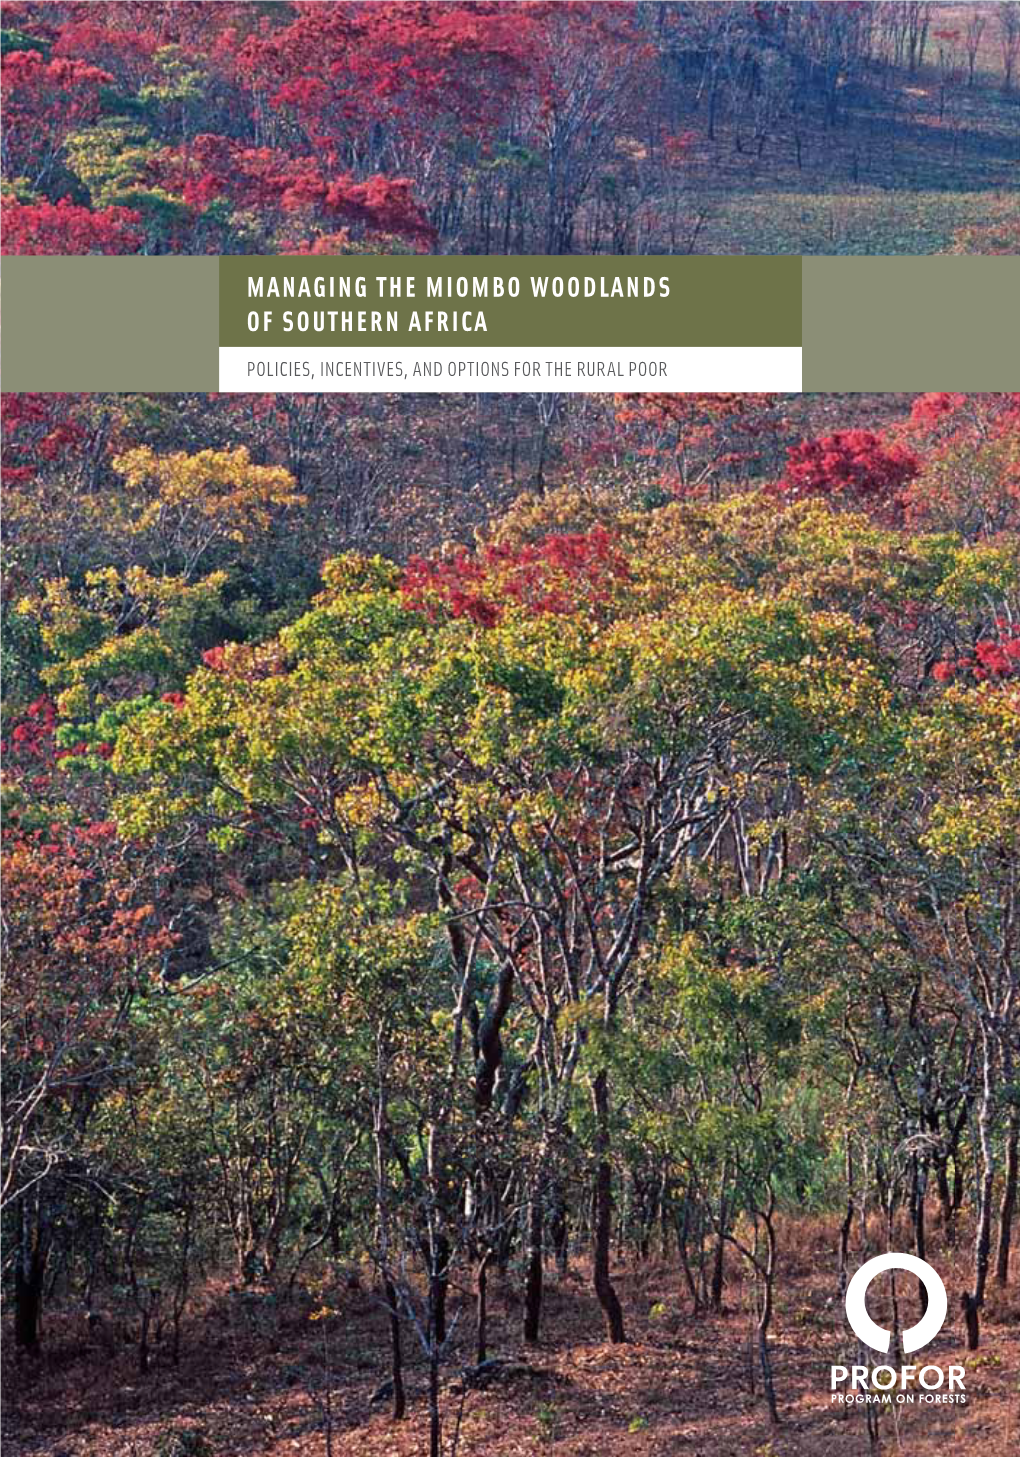 Policies and Incentives for Managing the Miombo Woodlands of Southern Africa